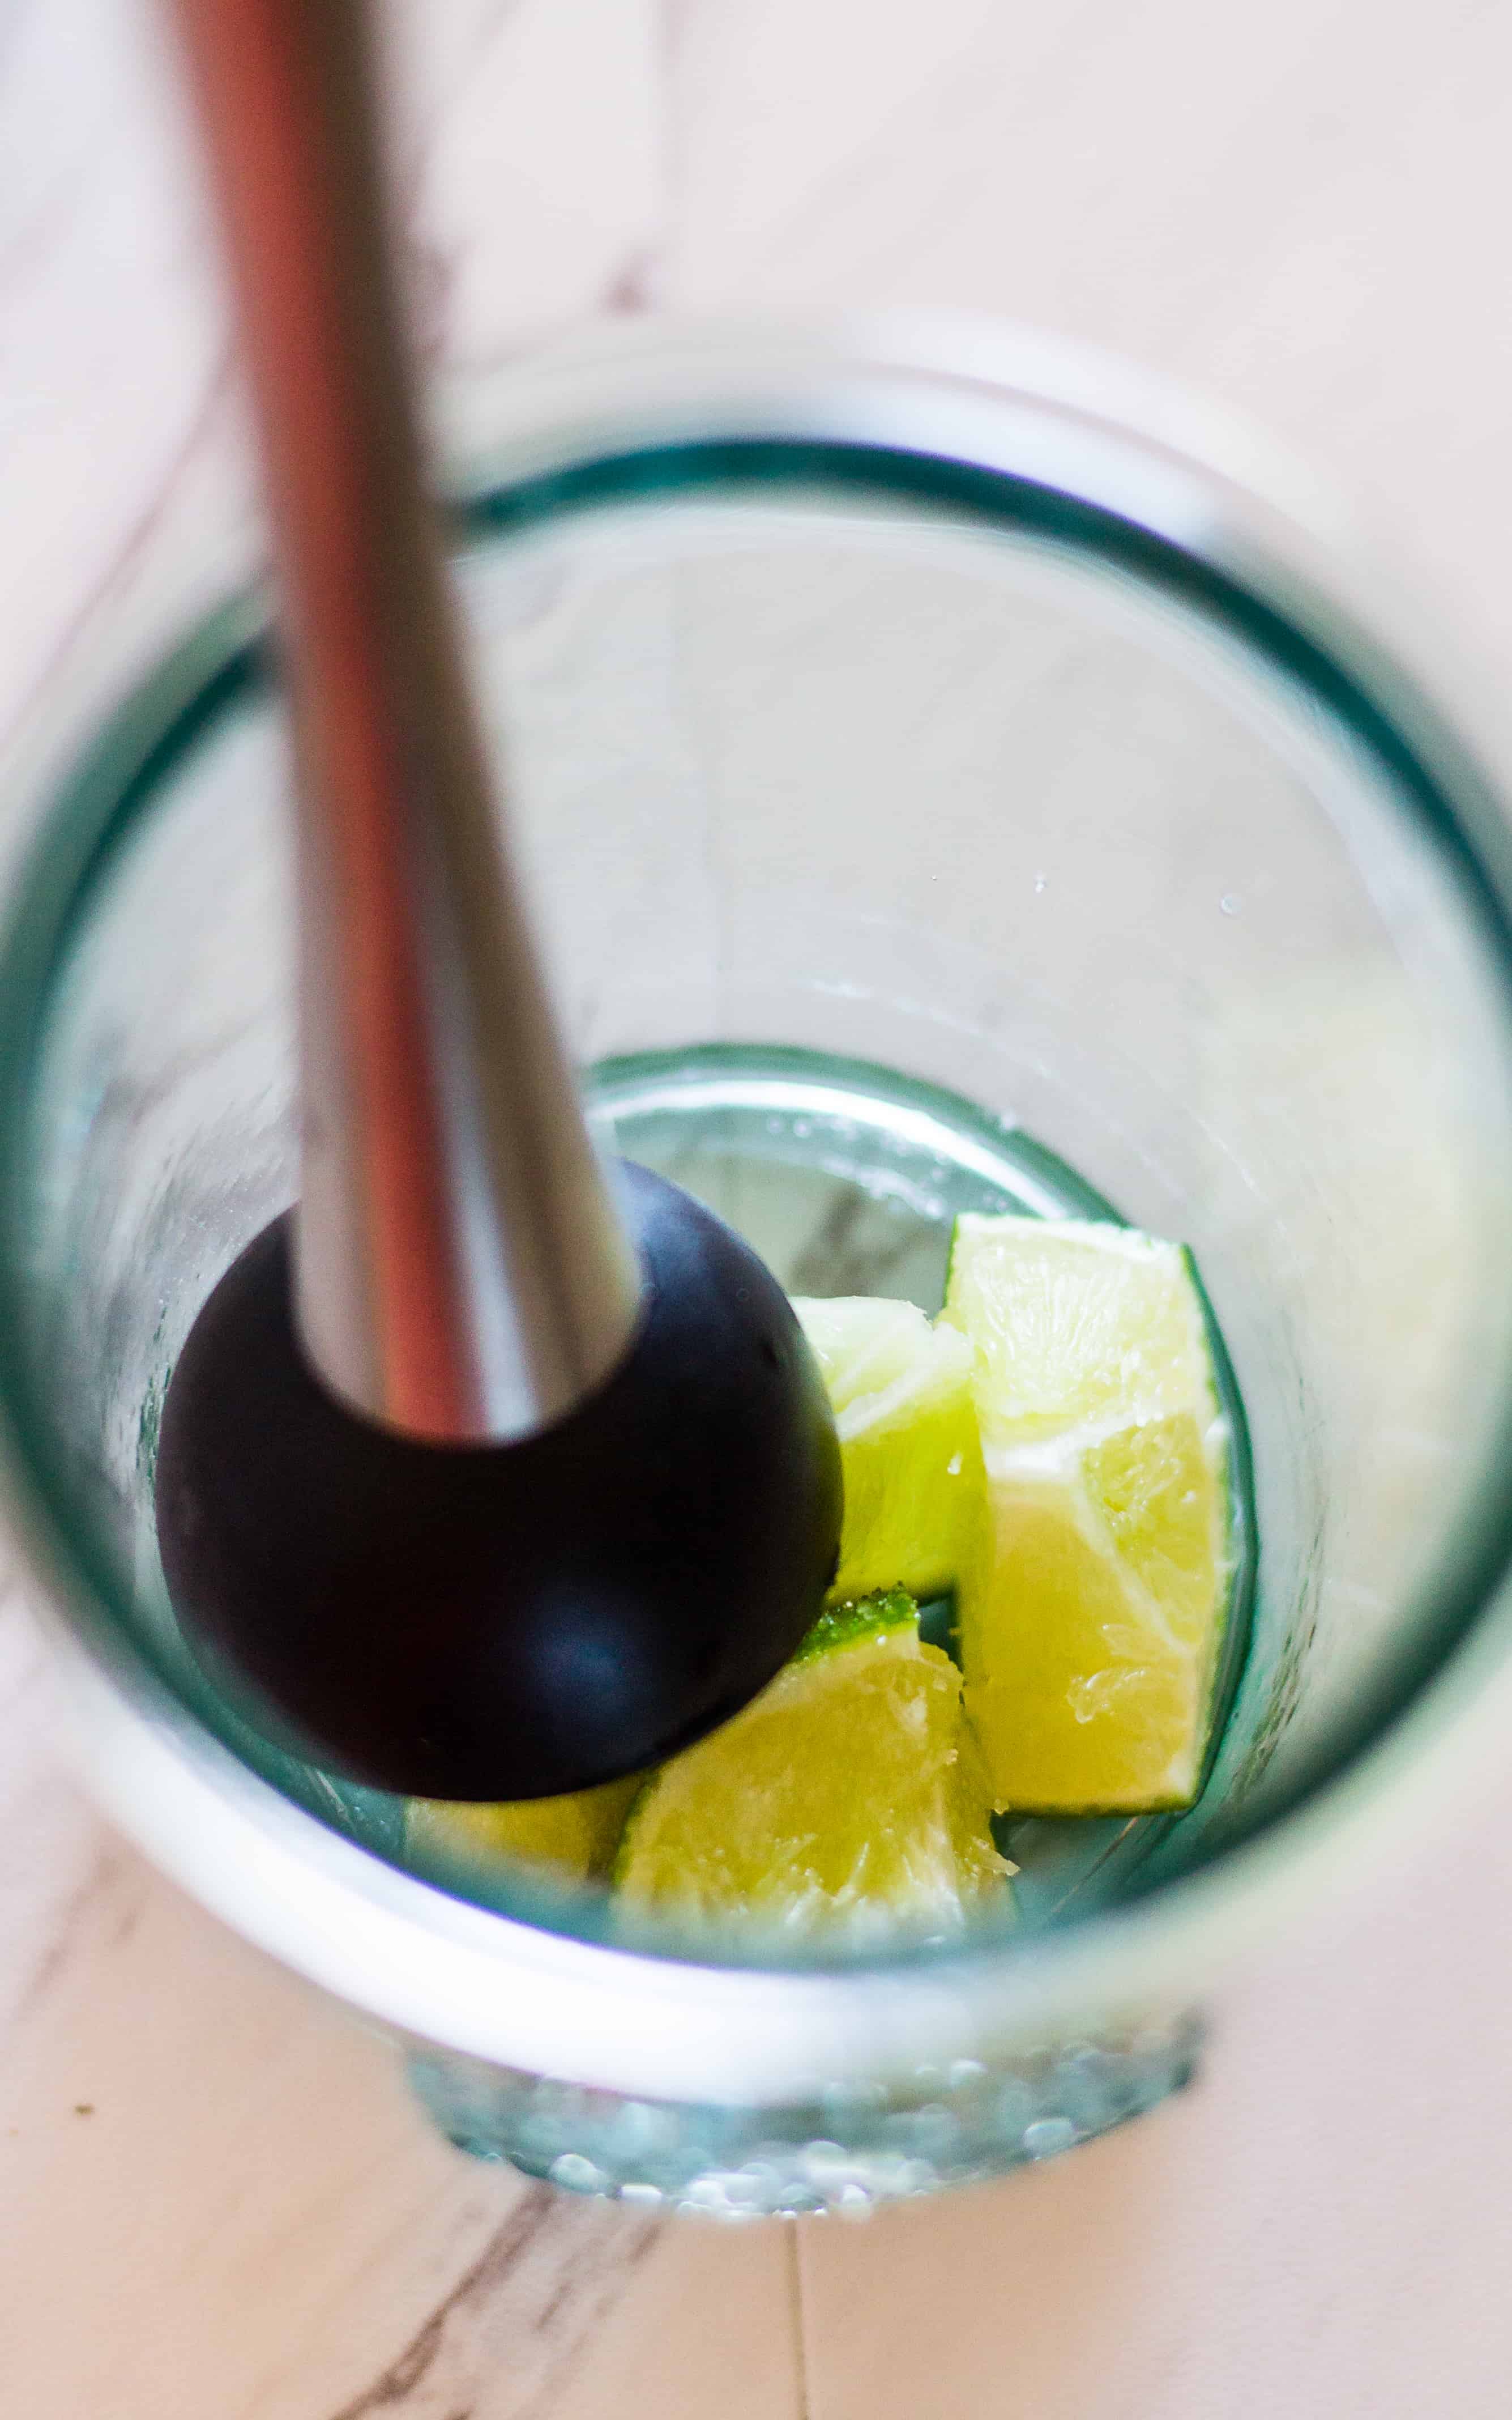 The sugar helps to juice the limes in this Spicy Jalapeño Caipirinha Cocktail 